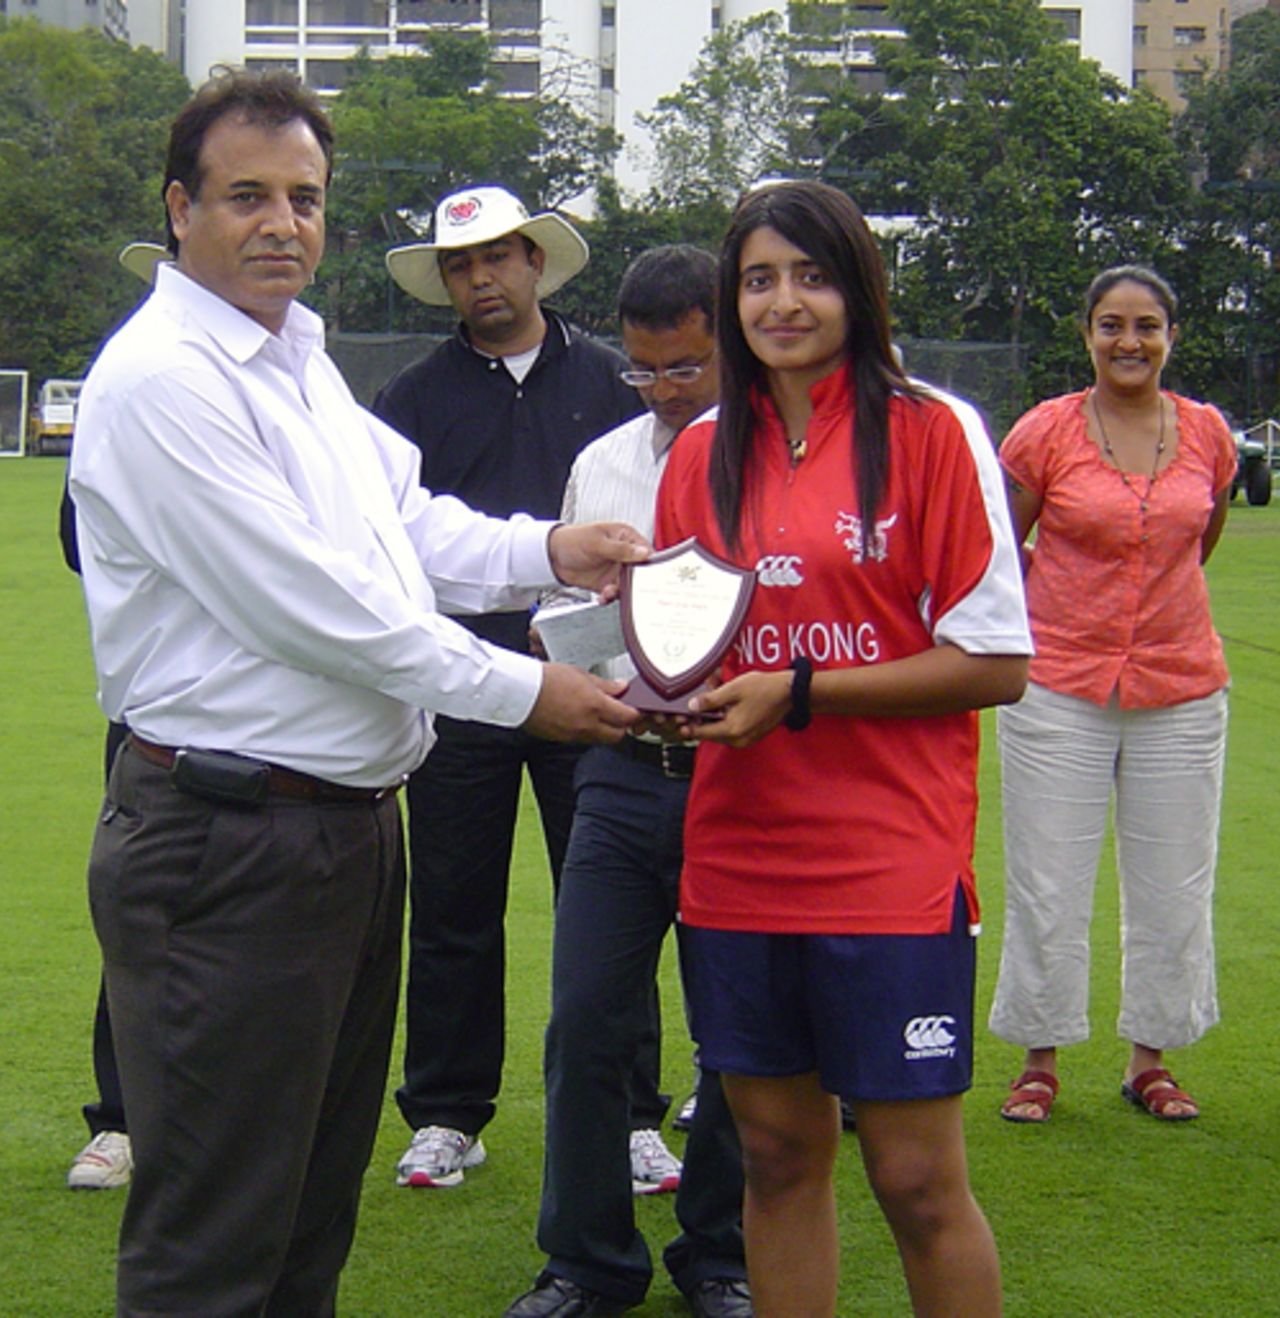 ong Kong's Keenu Gill receives her Player of the Match award against Pakistan 'A' Women at Kowloon Cricket Club